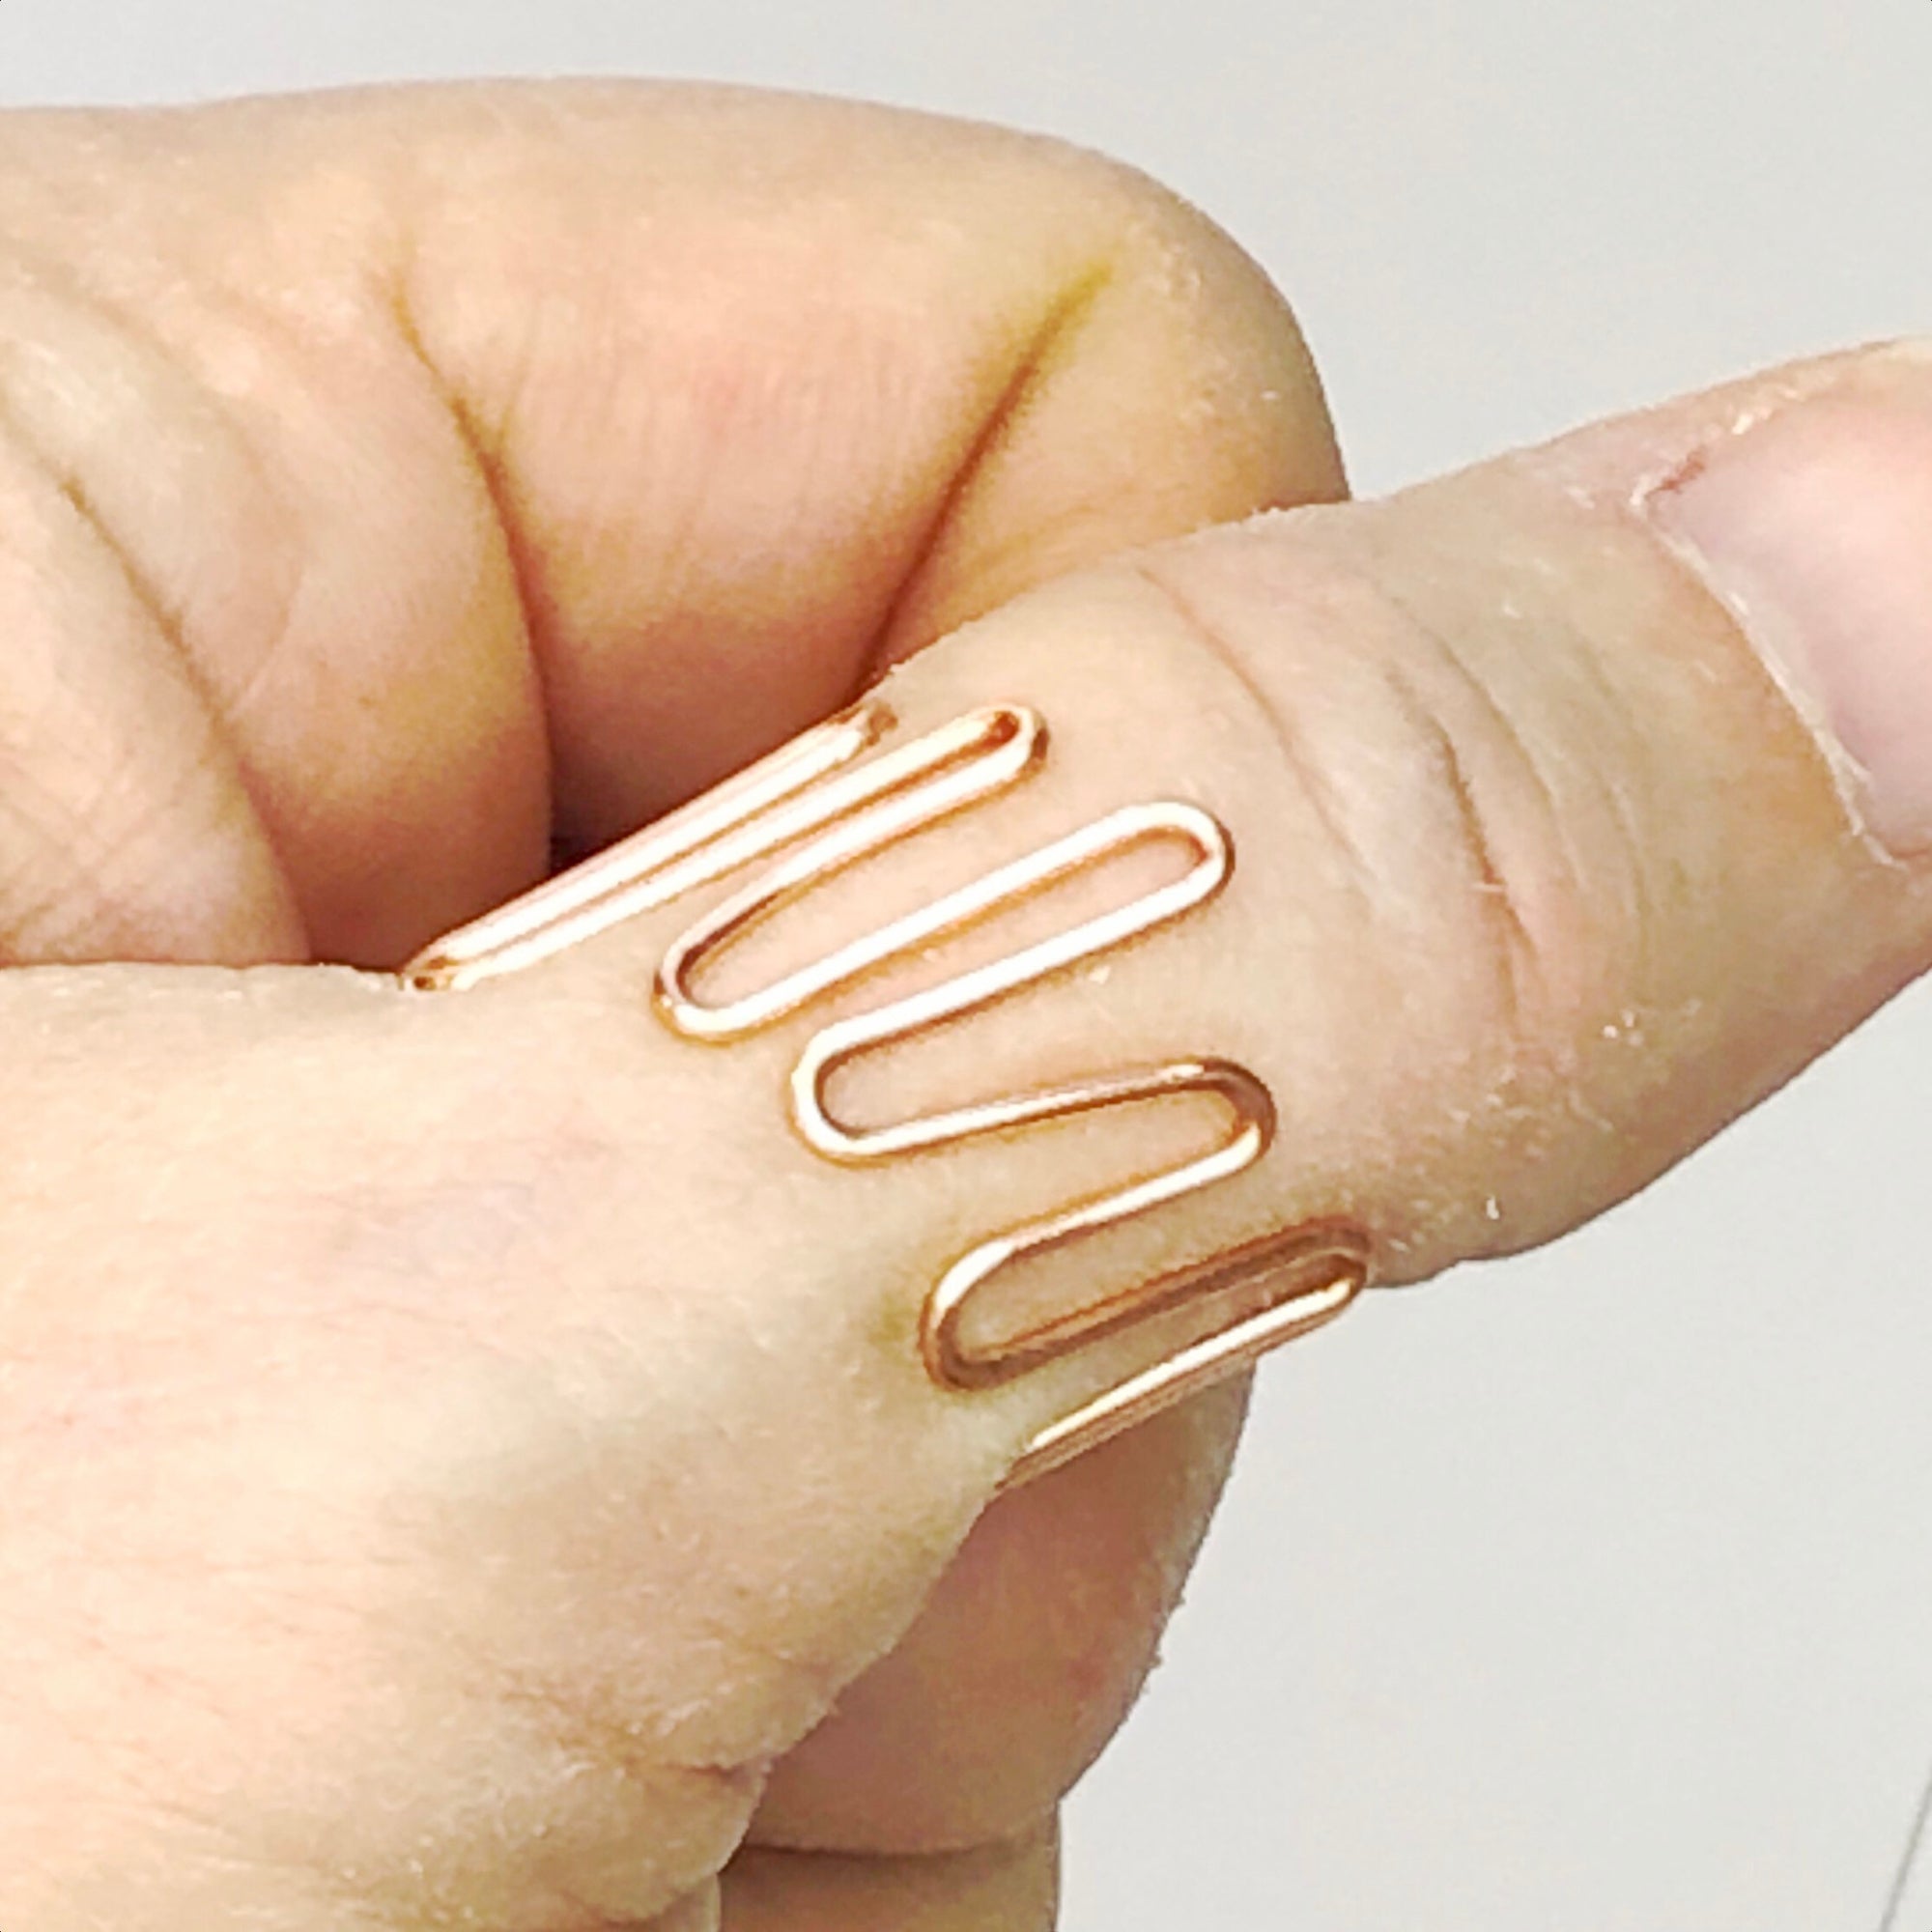 Rose gold copper thumb ring • Wavy wire adjustable ring • Serpentine twist ring • S wave geometric jewelry • Irregular shape tube band